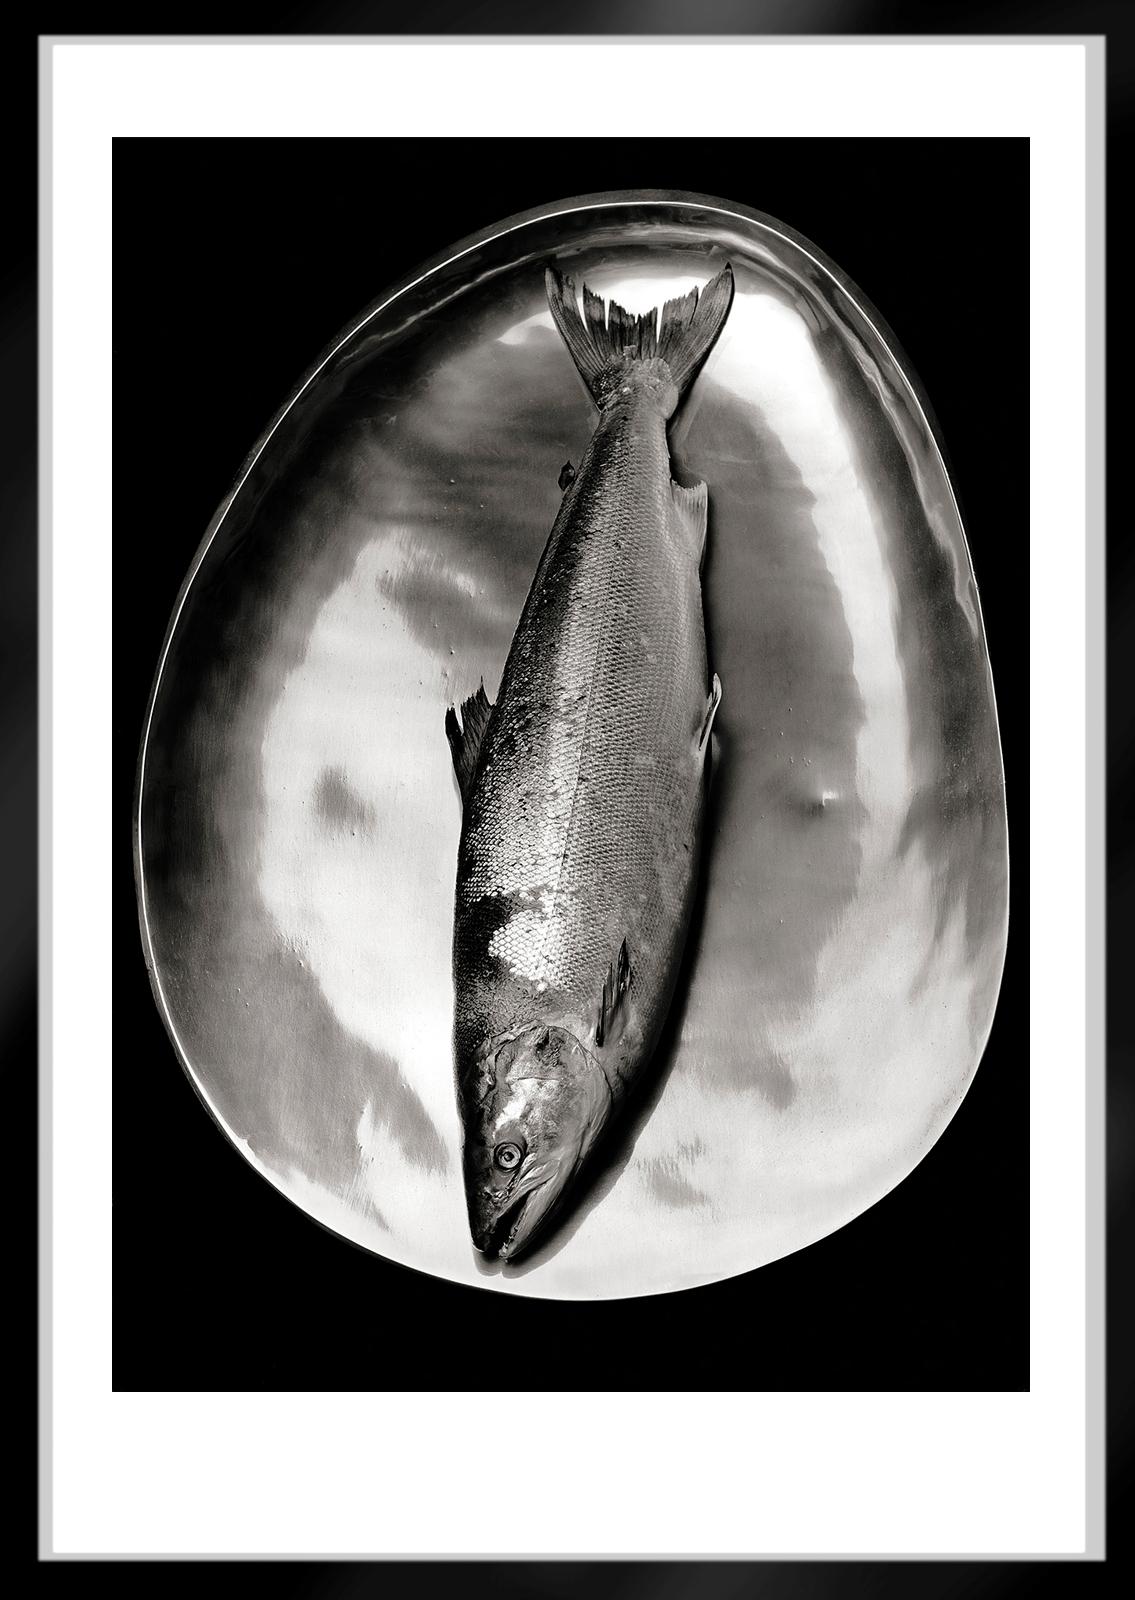 Salmon-Signed limited edition still life sea print, Black white photo, Nature - Contemporary Photograph by Ian Sanderson